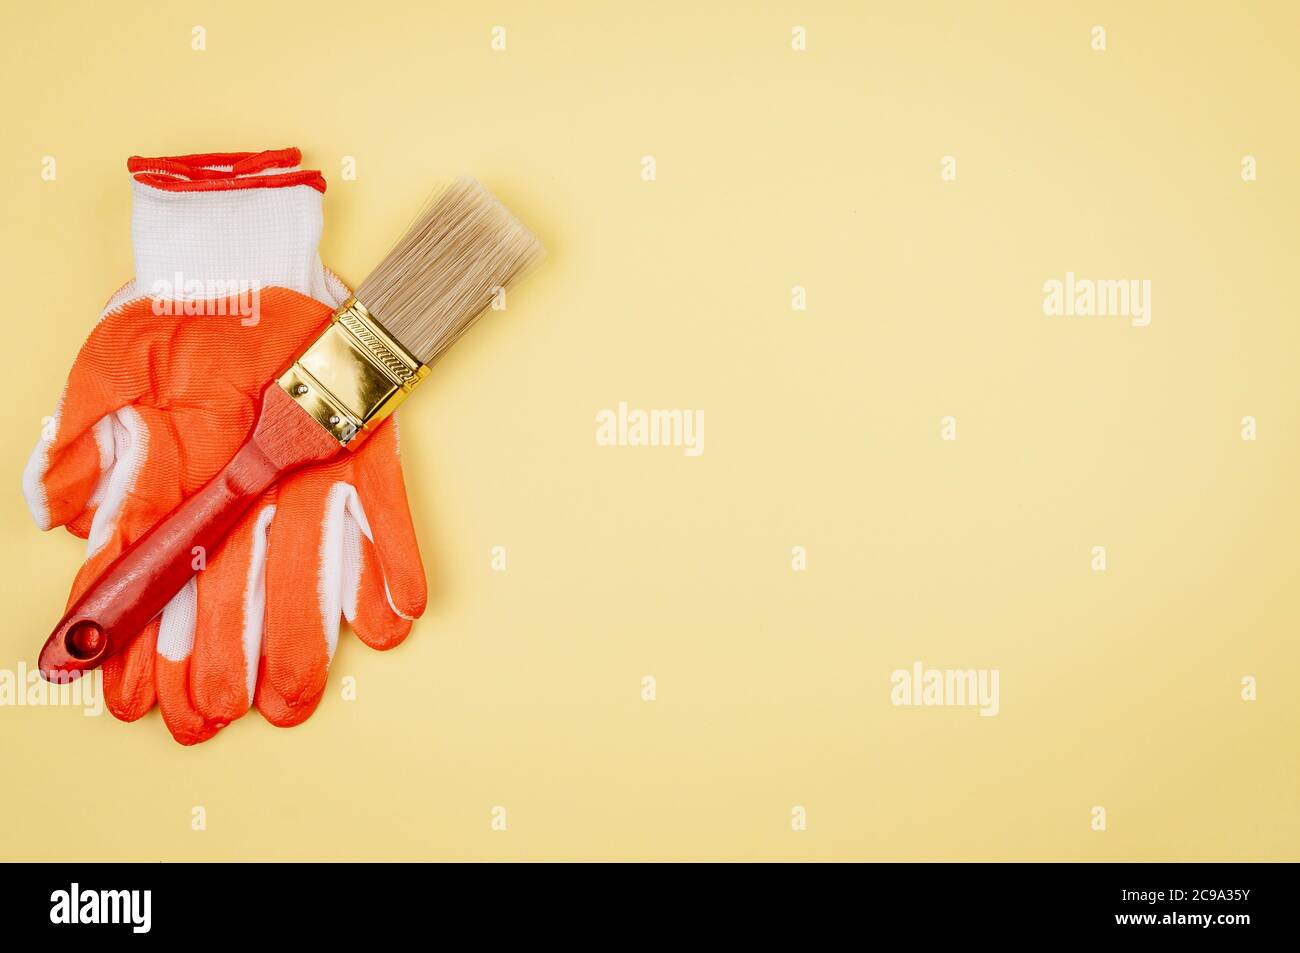 House painter tool on a yellow background. Stock Photo